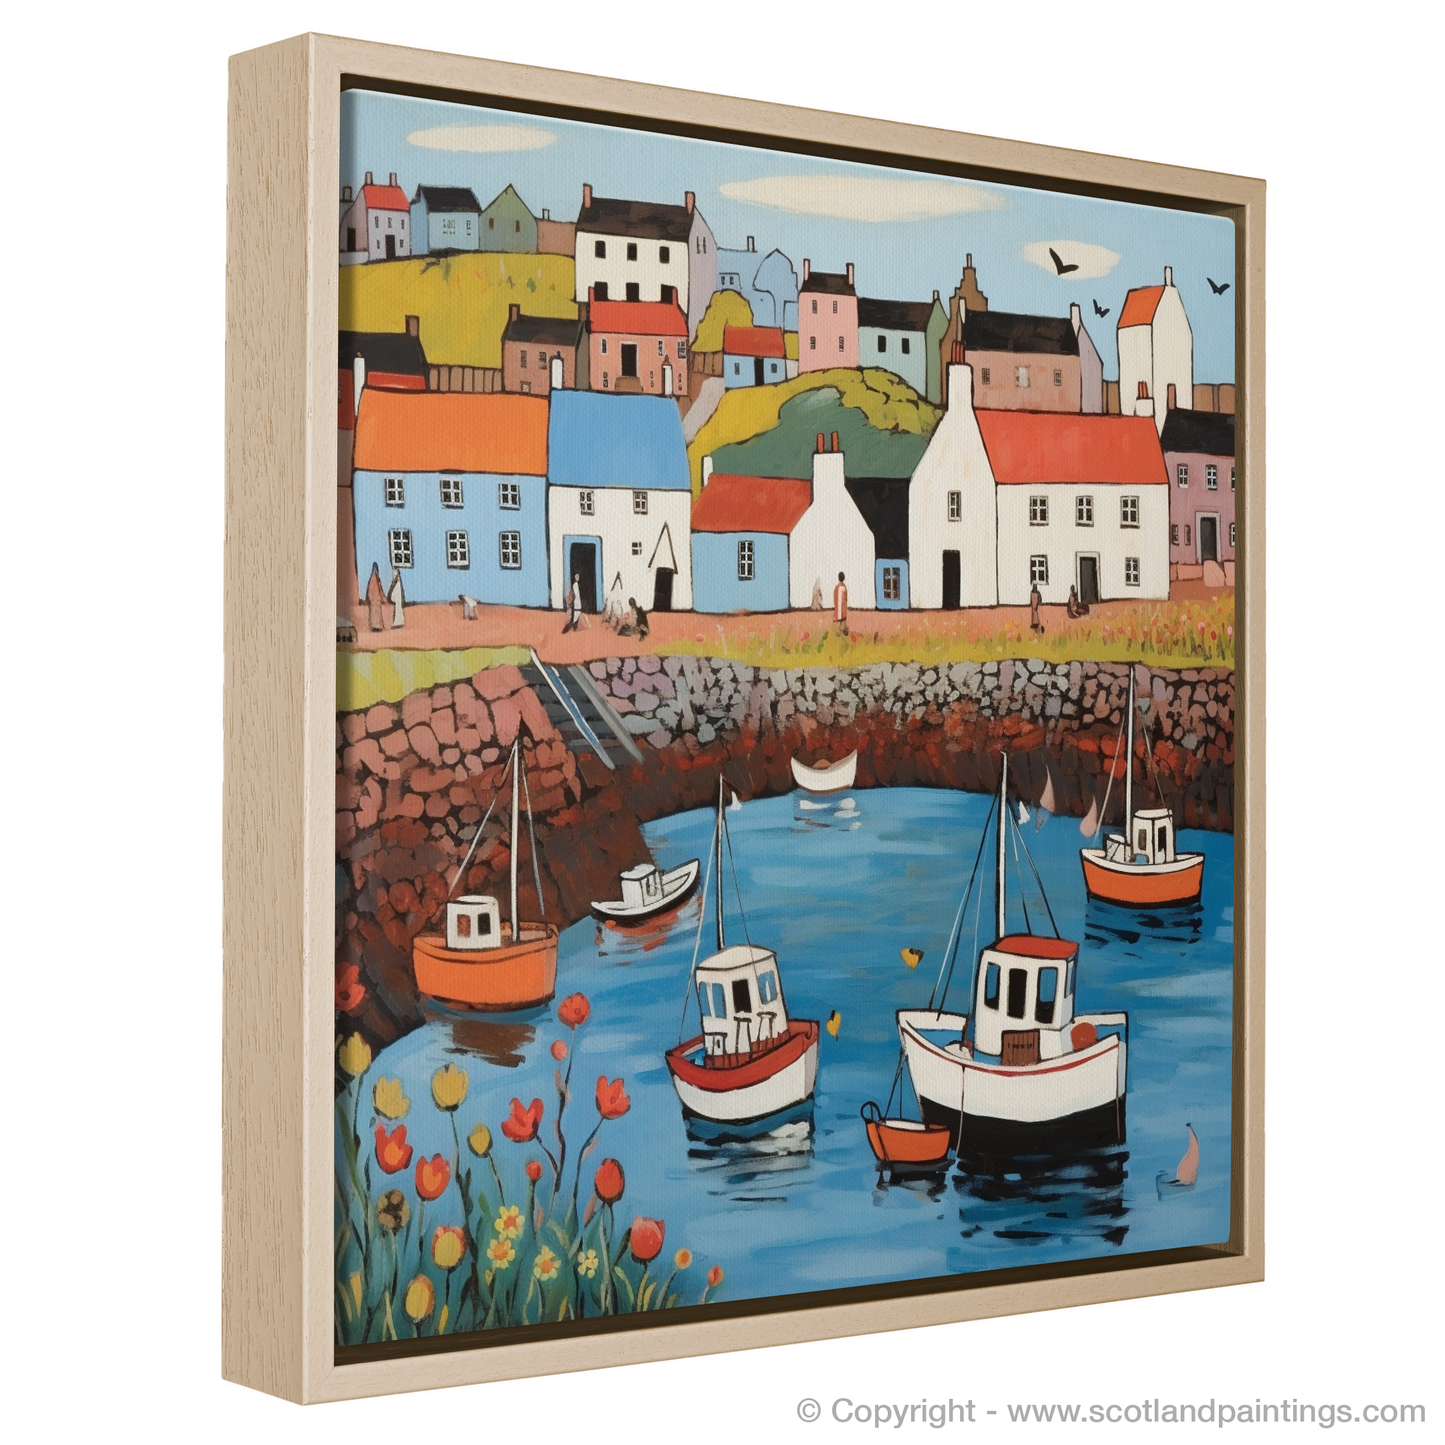 Crail Harbour Delight: A Naive Art Gem from the Scottish Coast